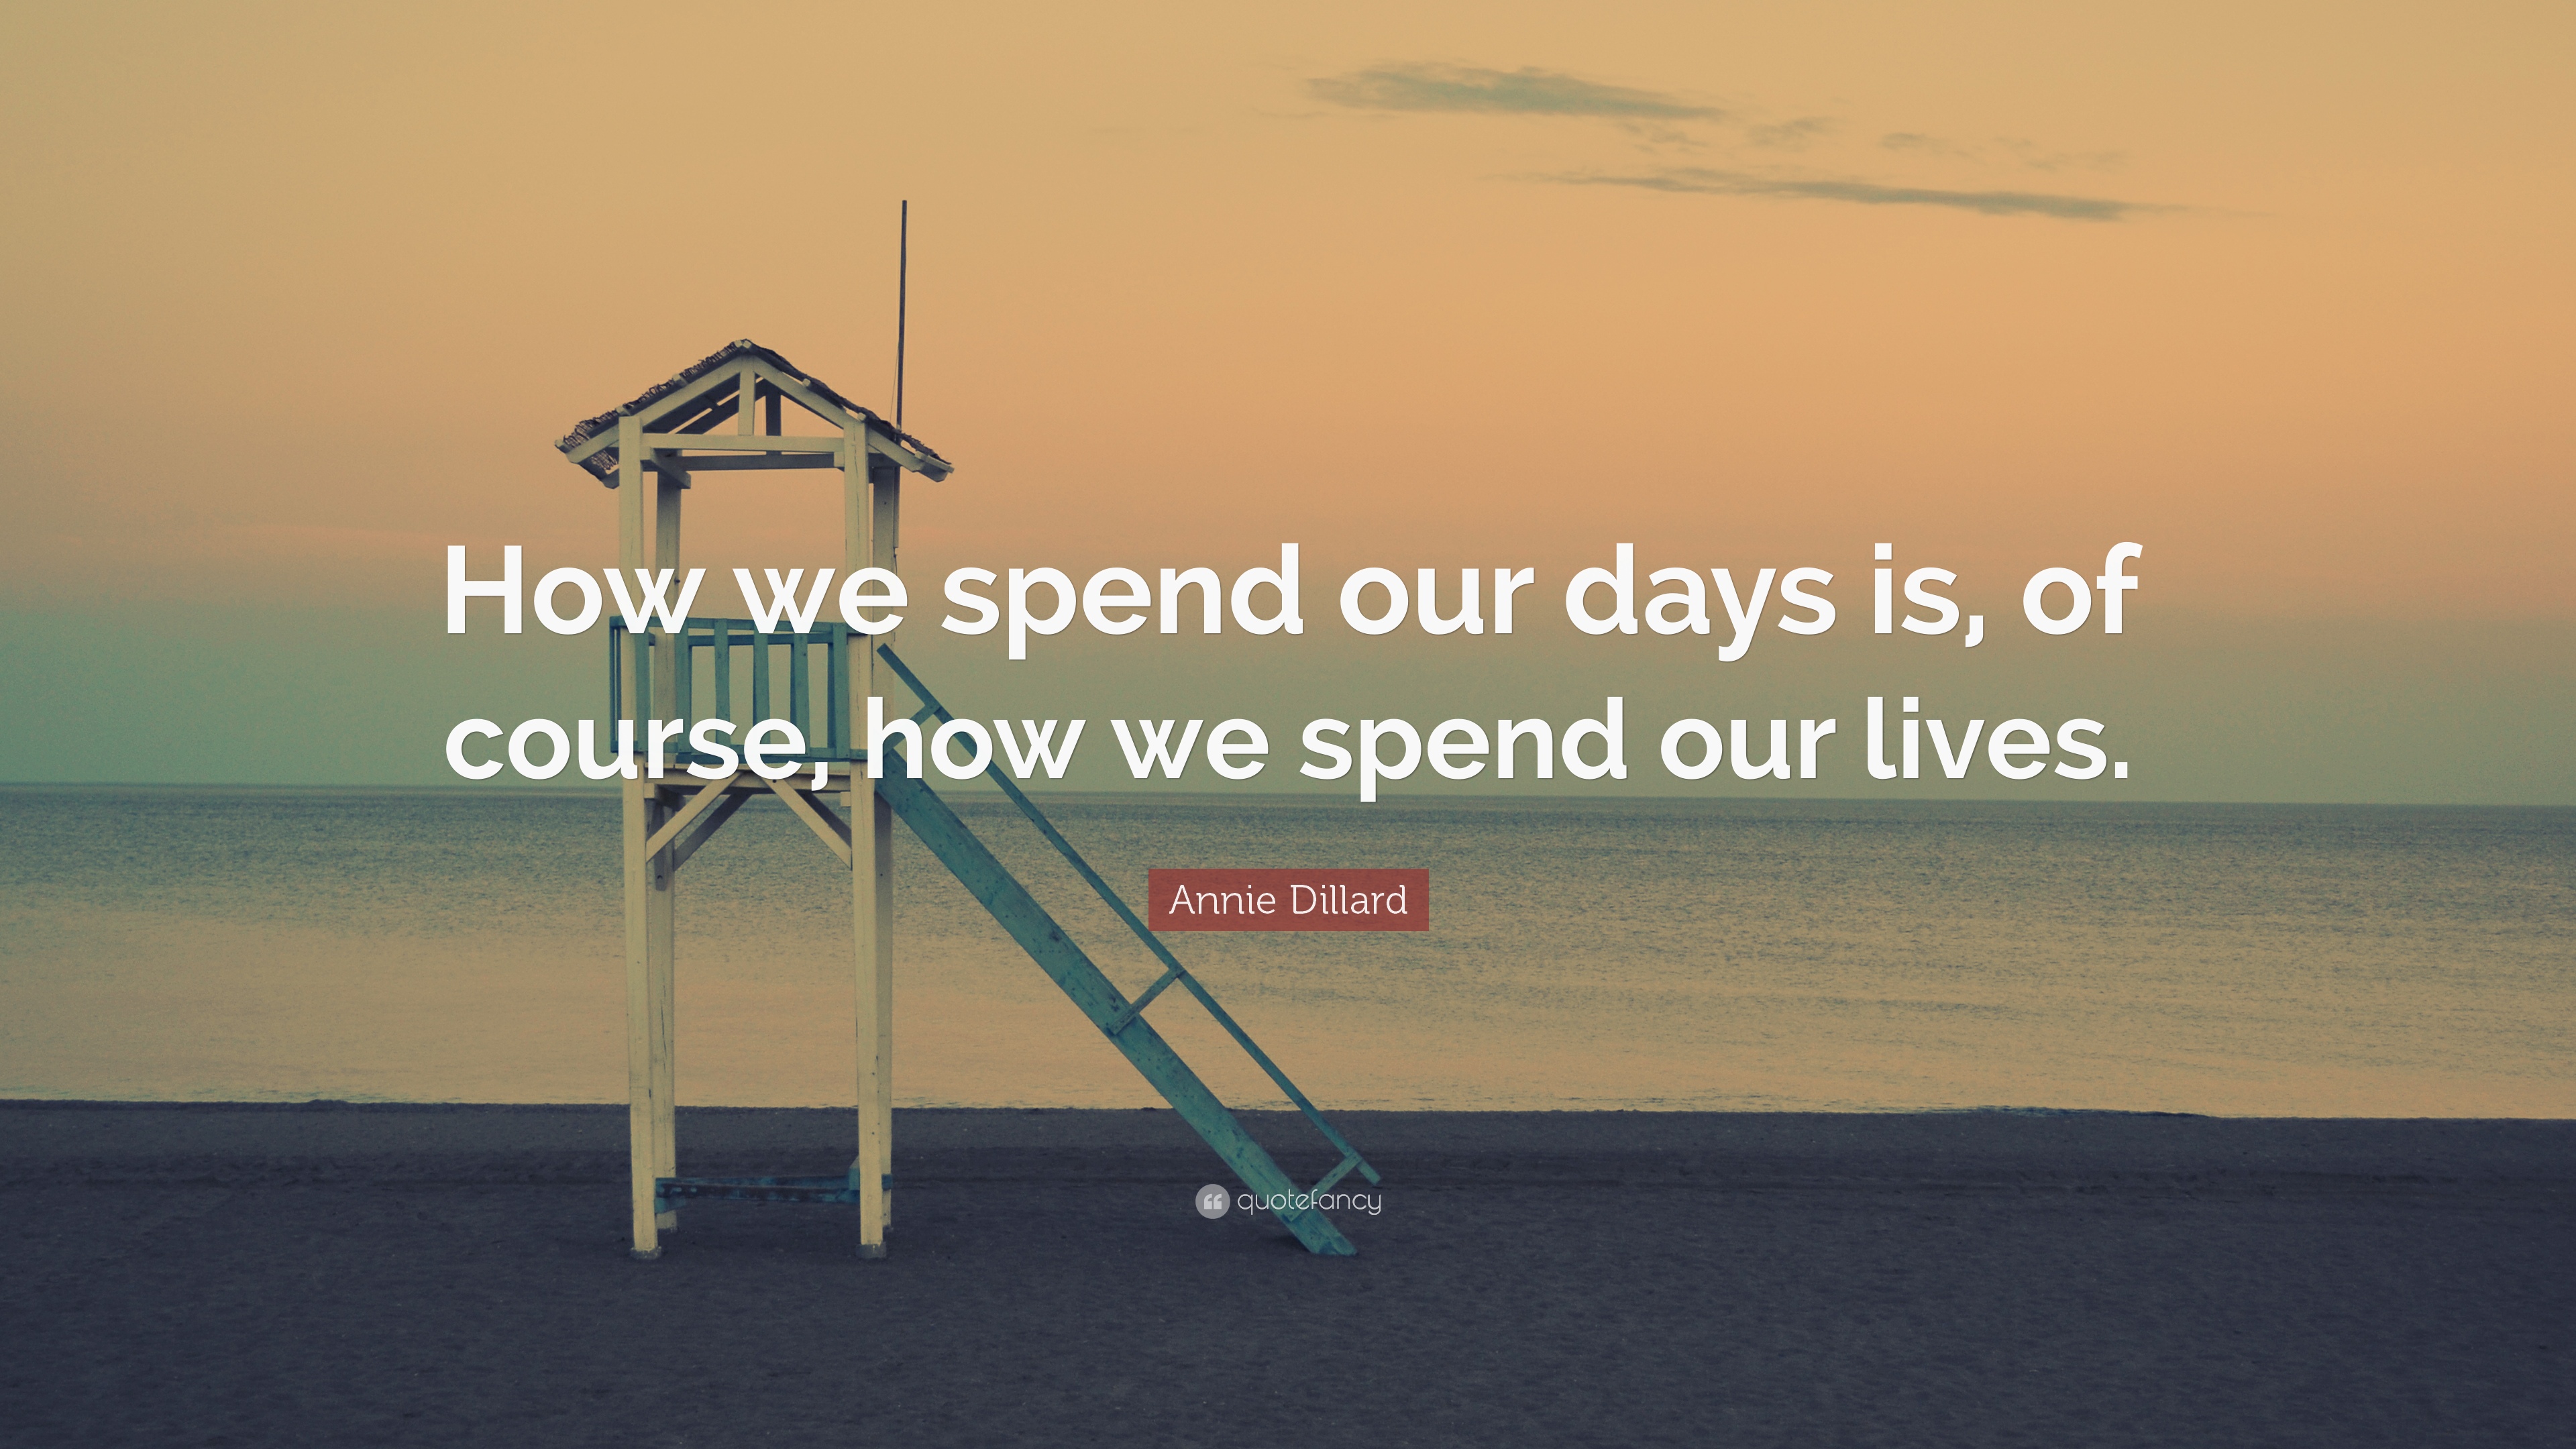 17121-annie-dillard-quote-how-we-spend-our-days-is-of-course-how-we